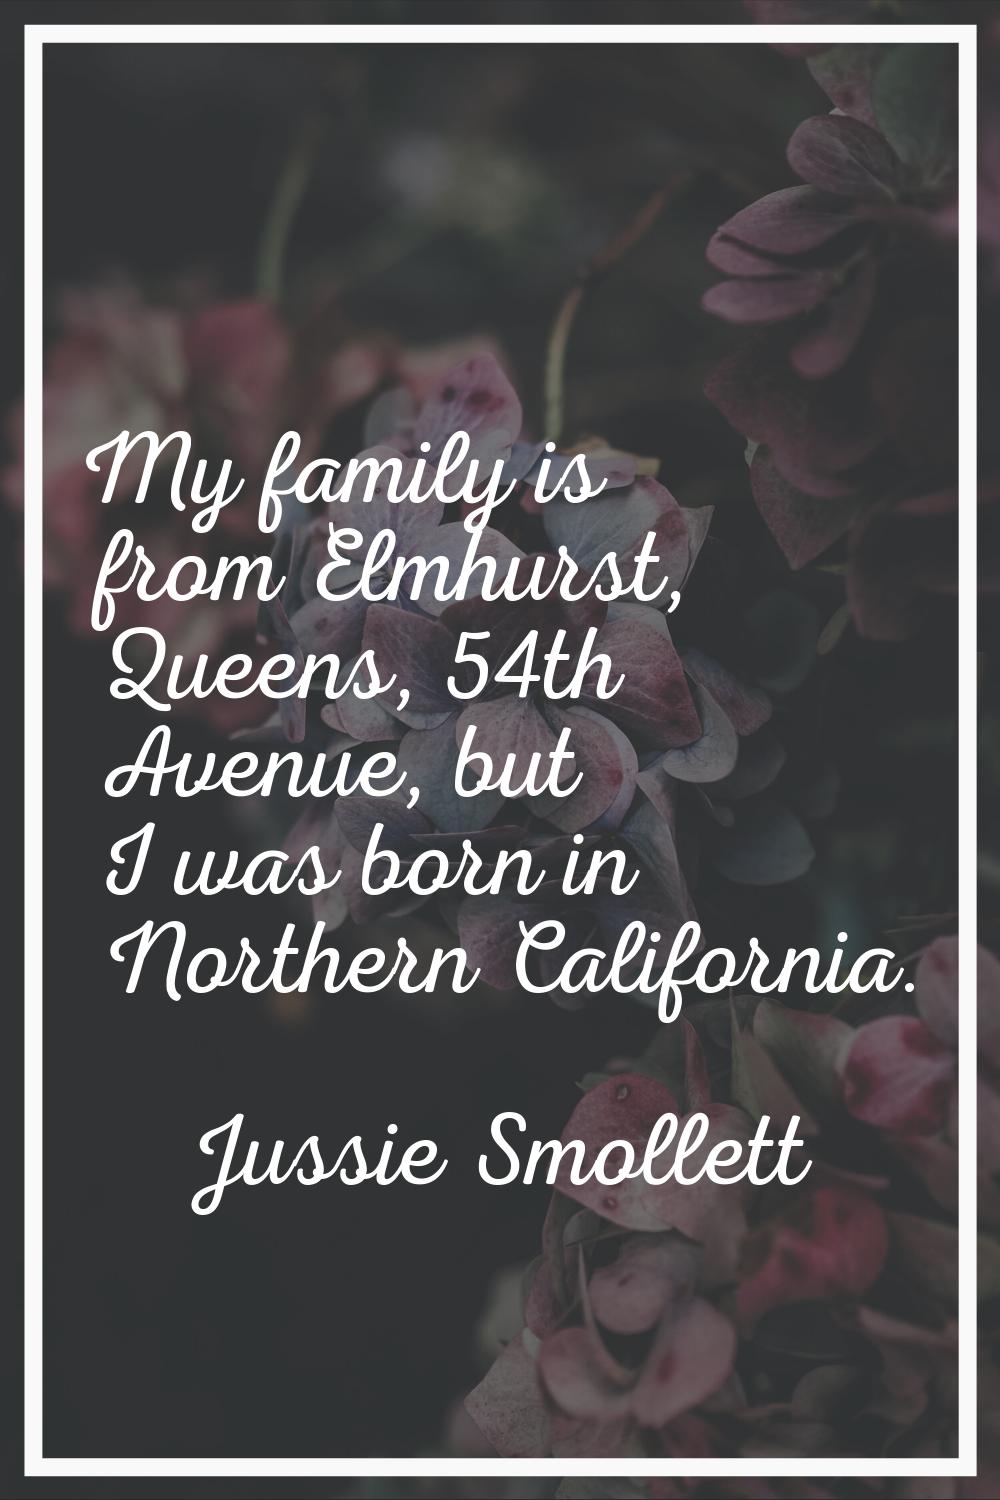 My family is from Elmhurst, Queens, 54th Avenue, but I was born in Northern California.